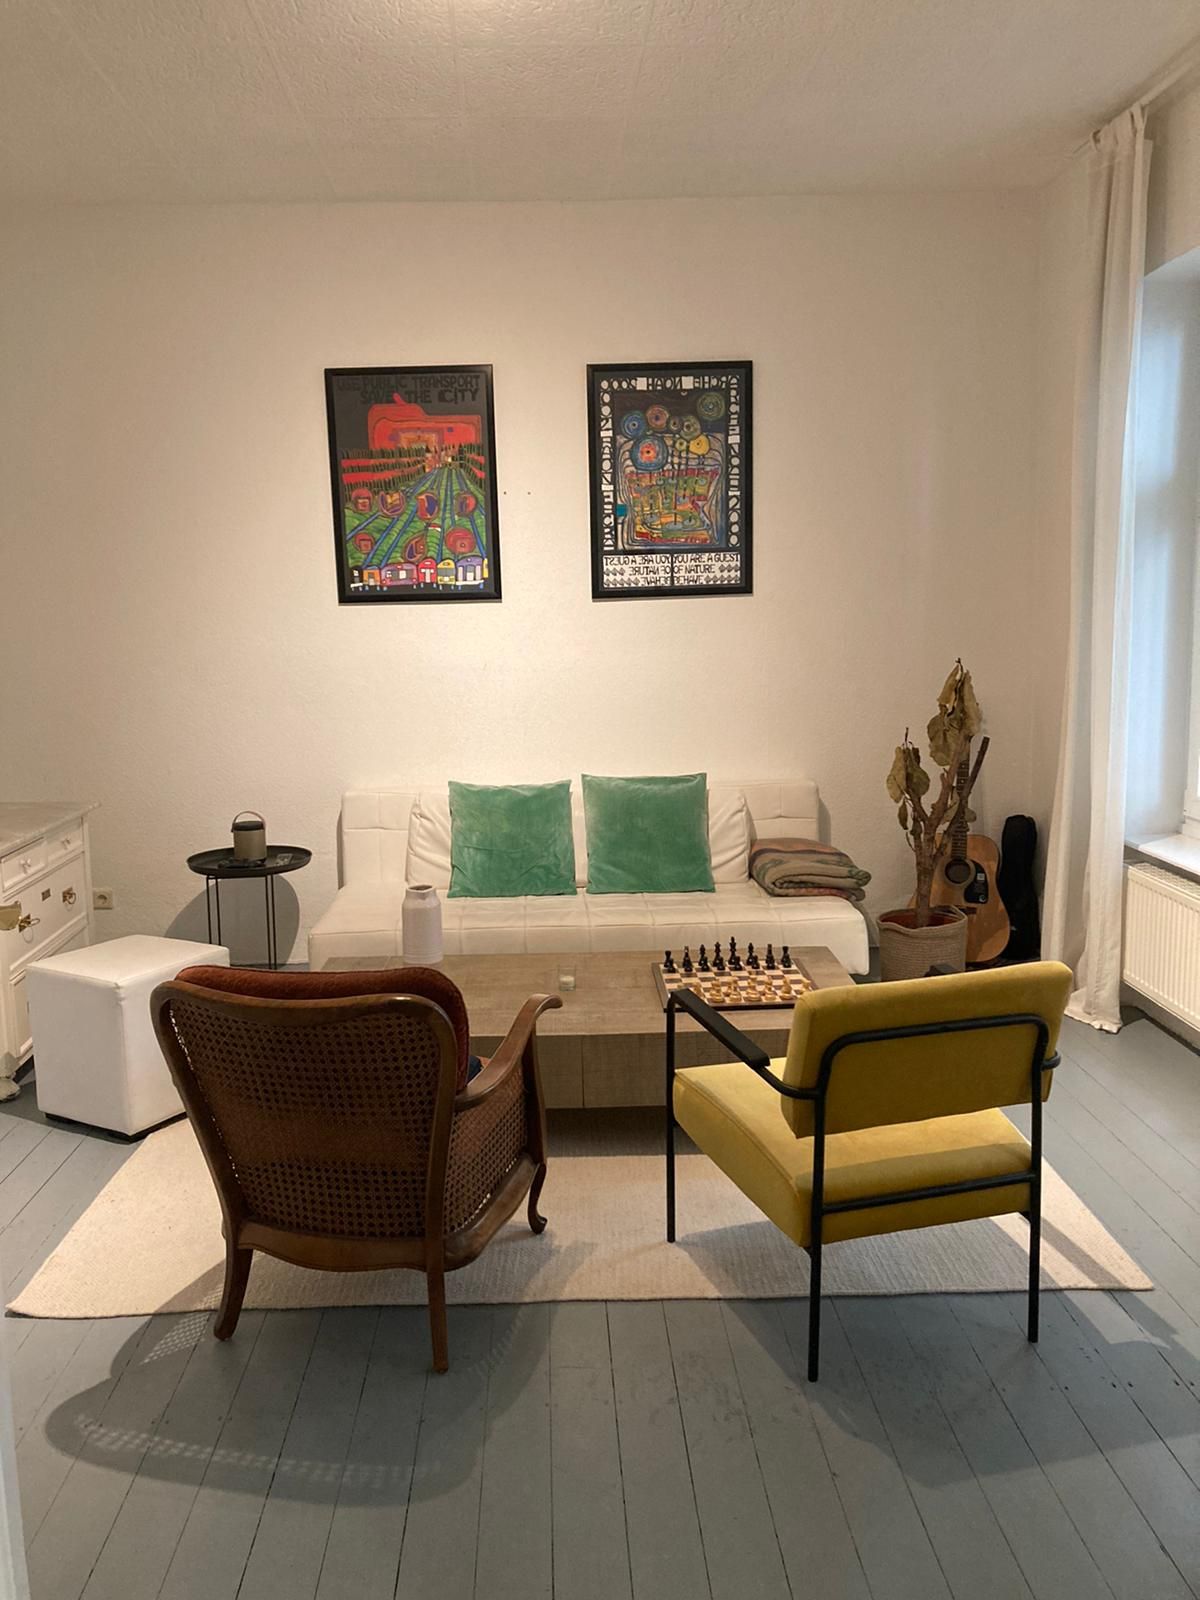 Amazing location. Calm Maisonette in the middle of Mitte